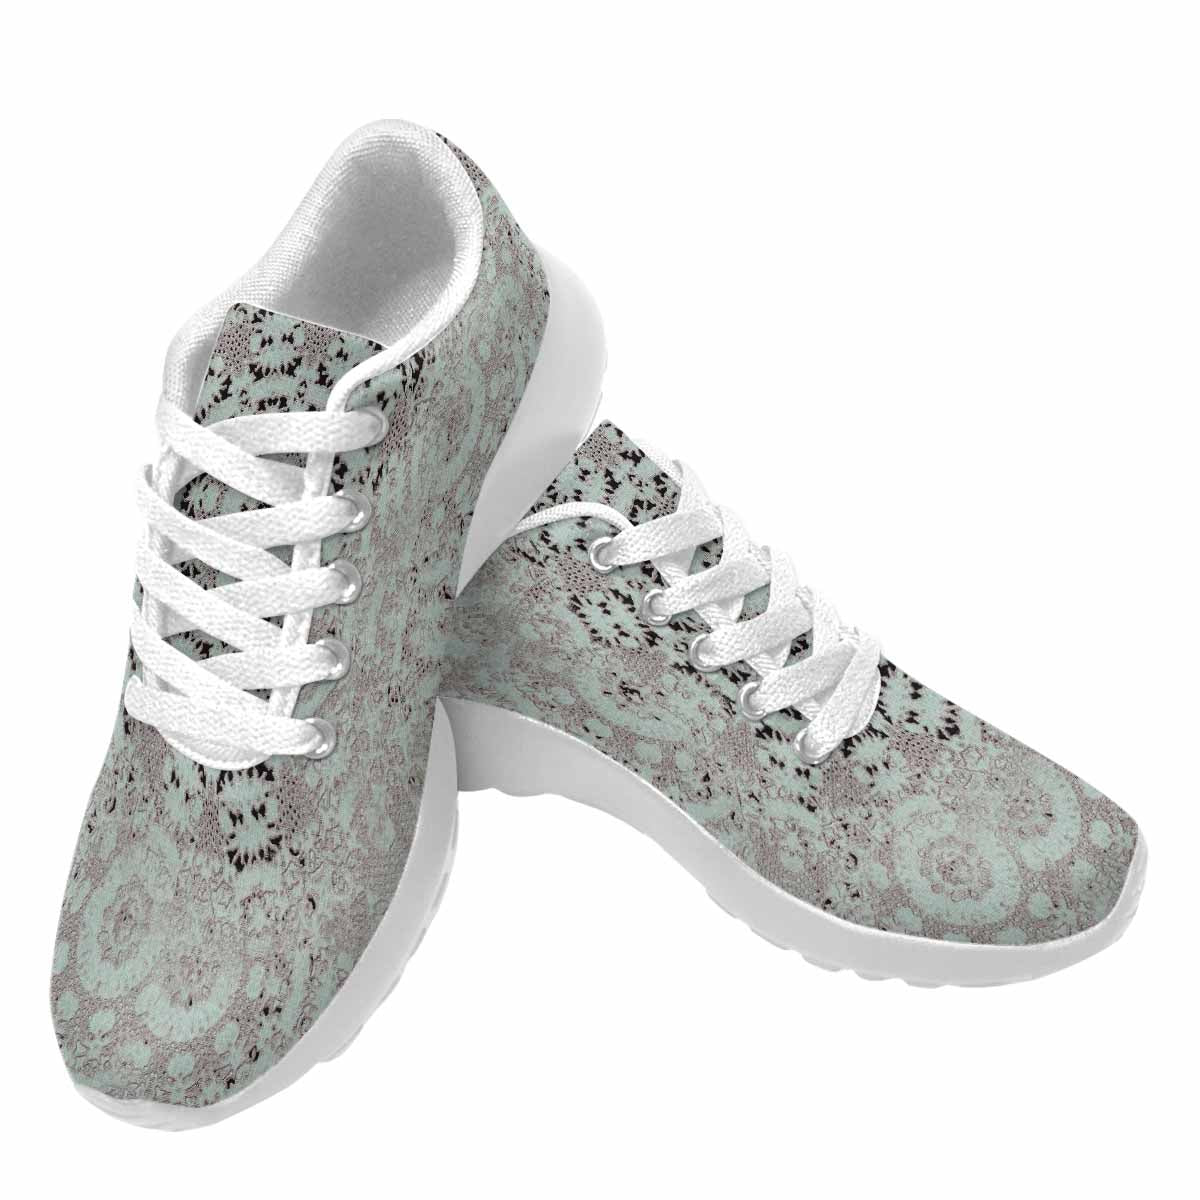 Victorian lace print, womens cute casual or running sneakers, design 51